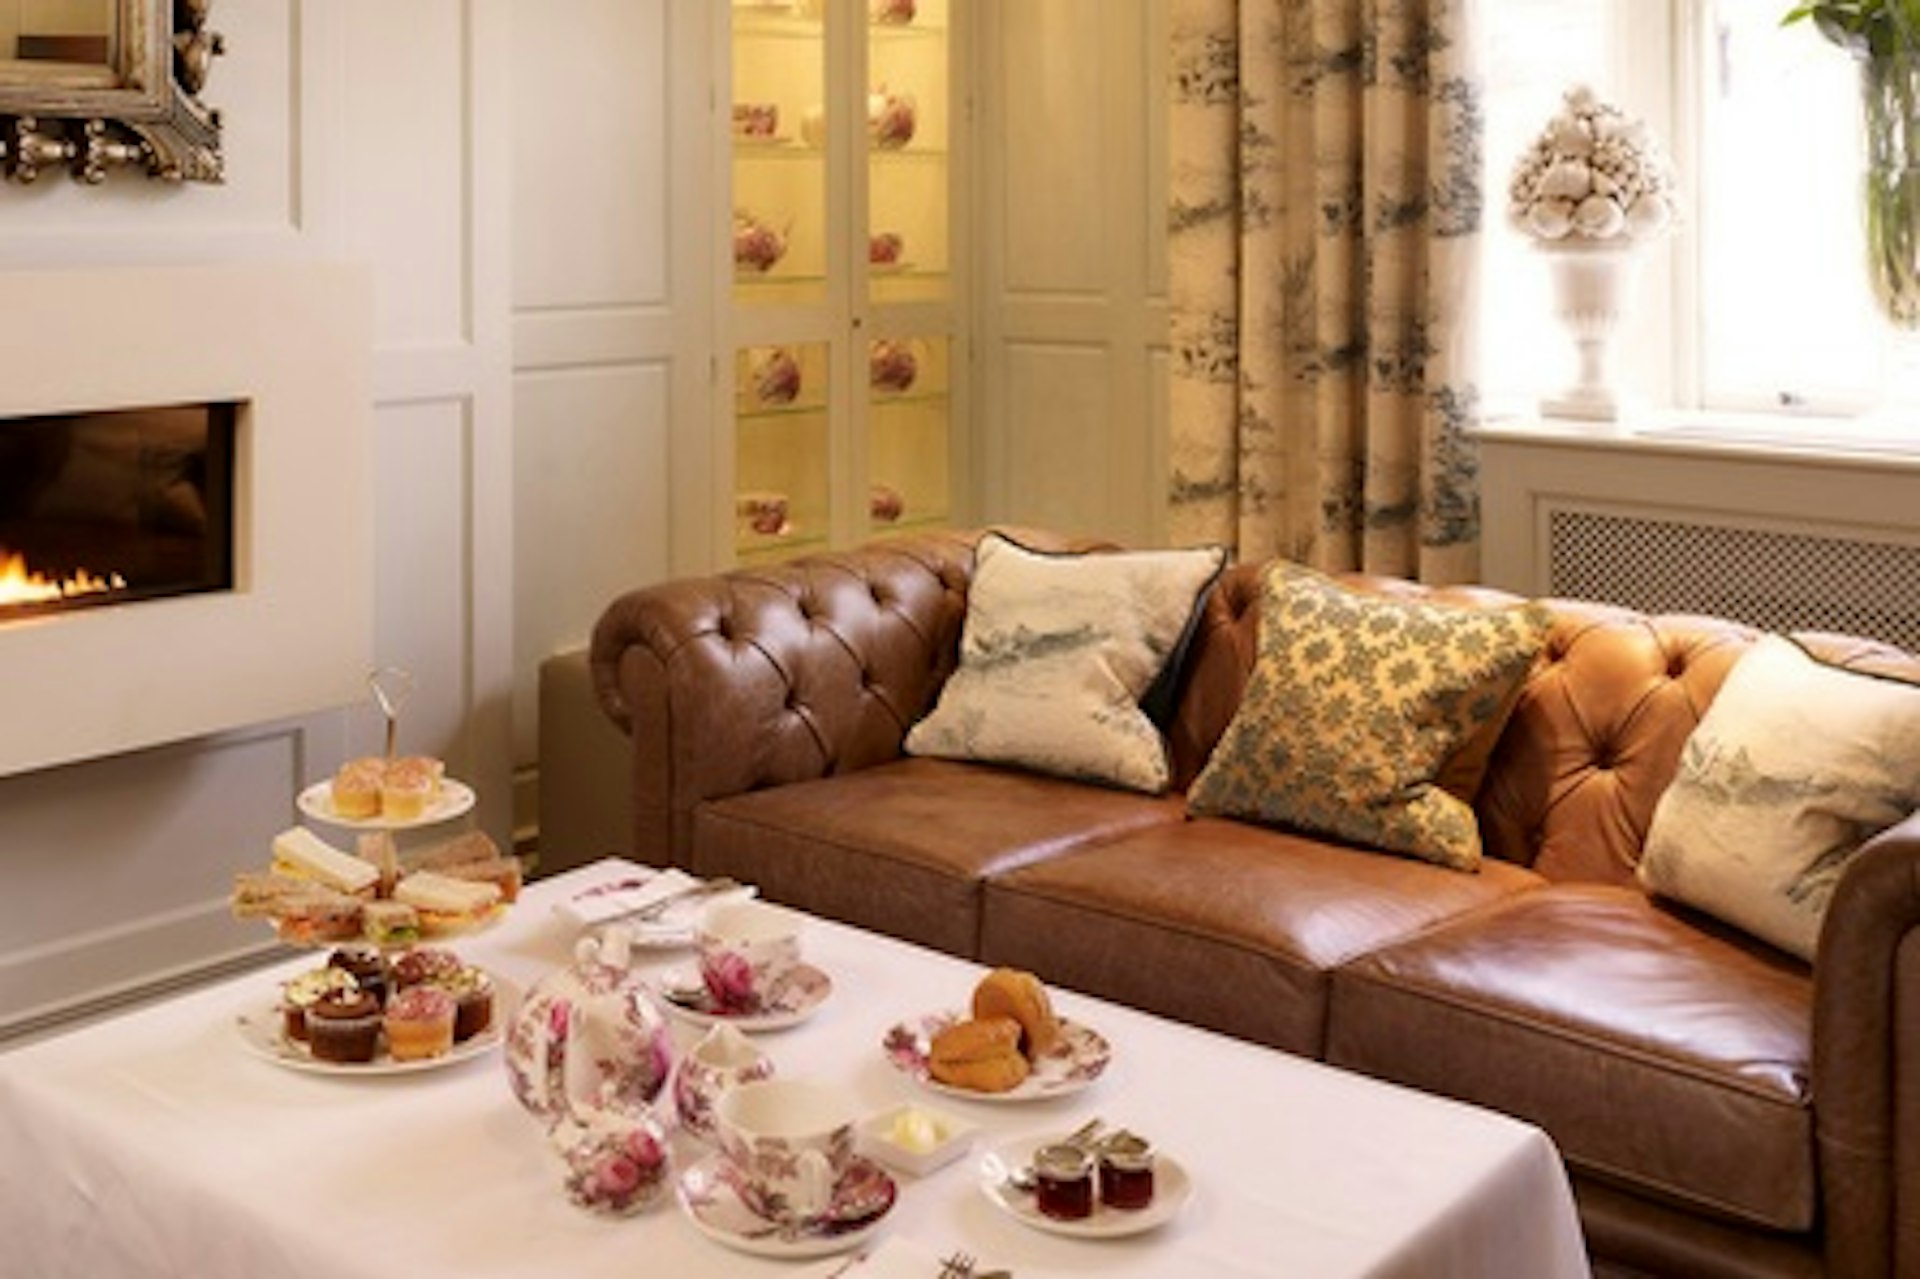 Afternoon Tea and River Sightseeing Cruise for Two in Historic Stratford Upon Avon 2